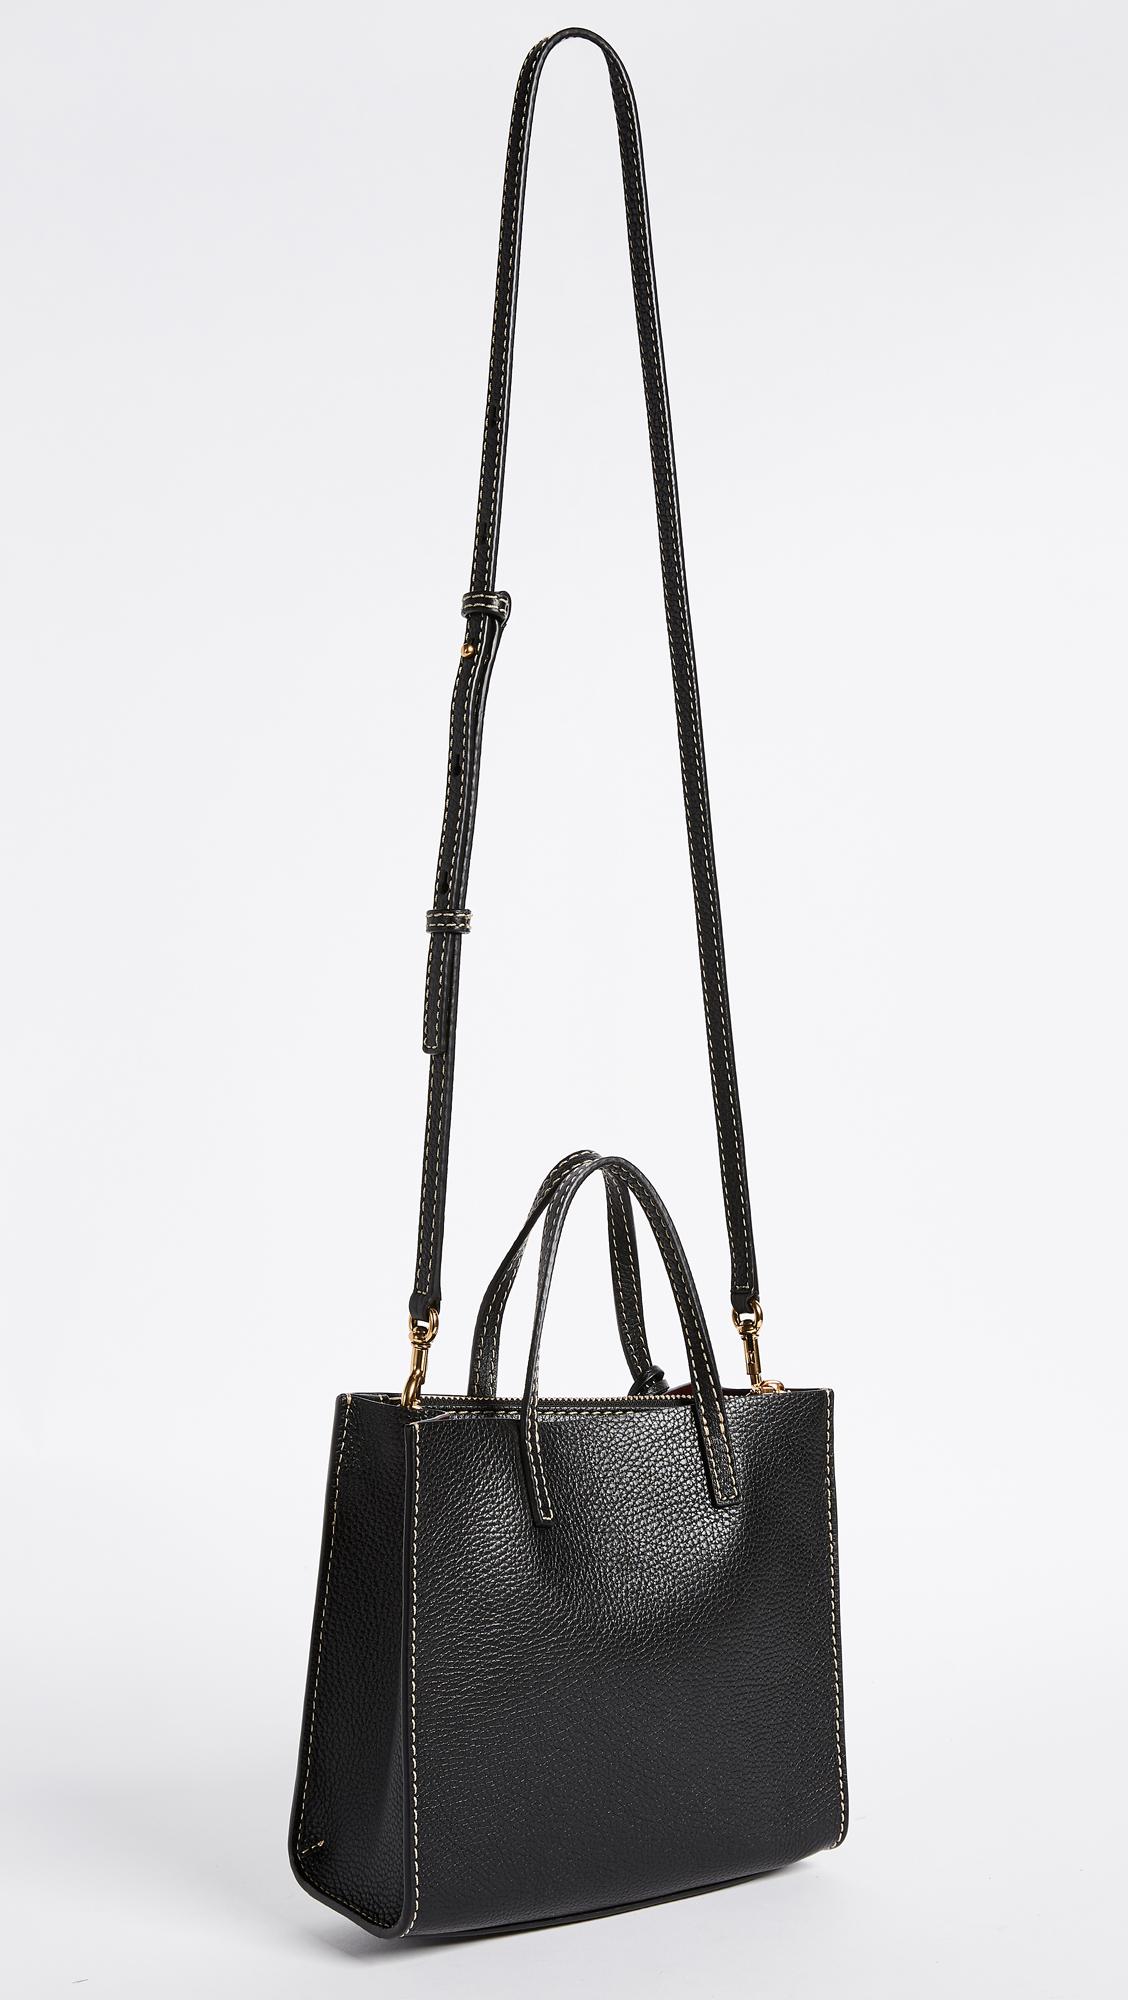 Marc Jacobs Leather Mini Grind Tote in Black/Gold (Black) - Lyst